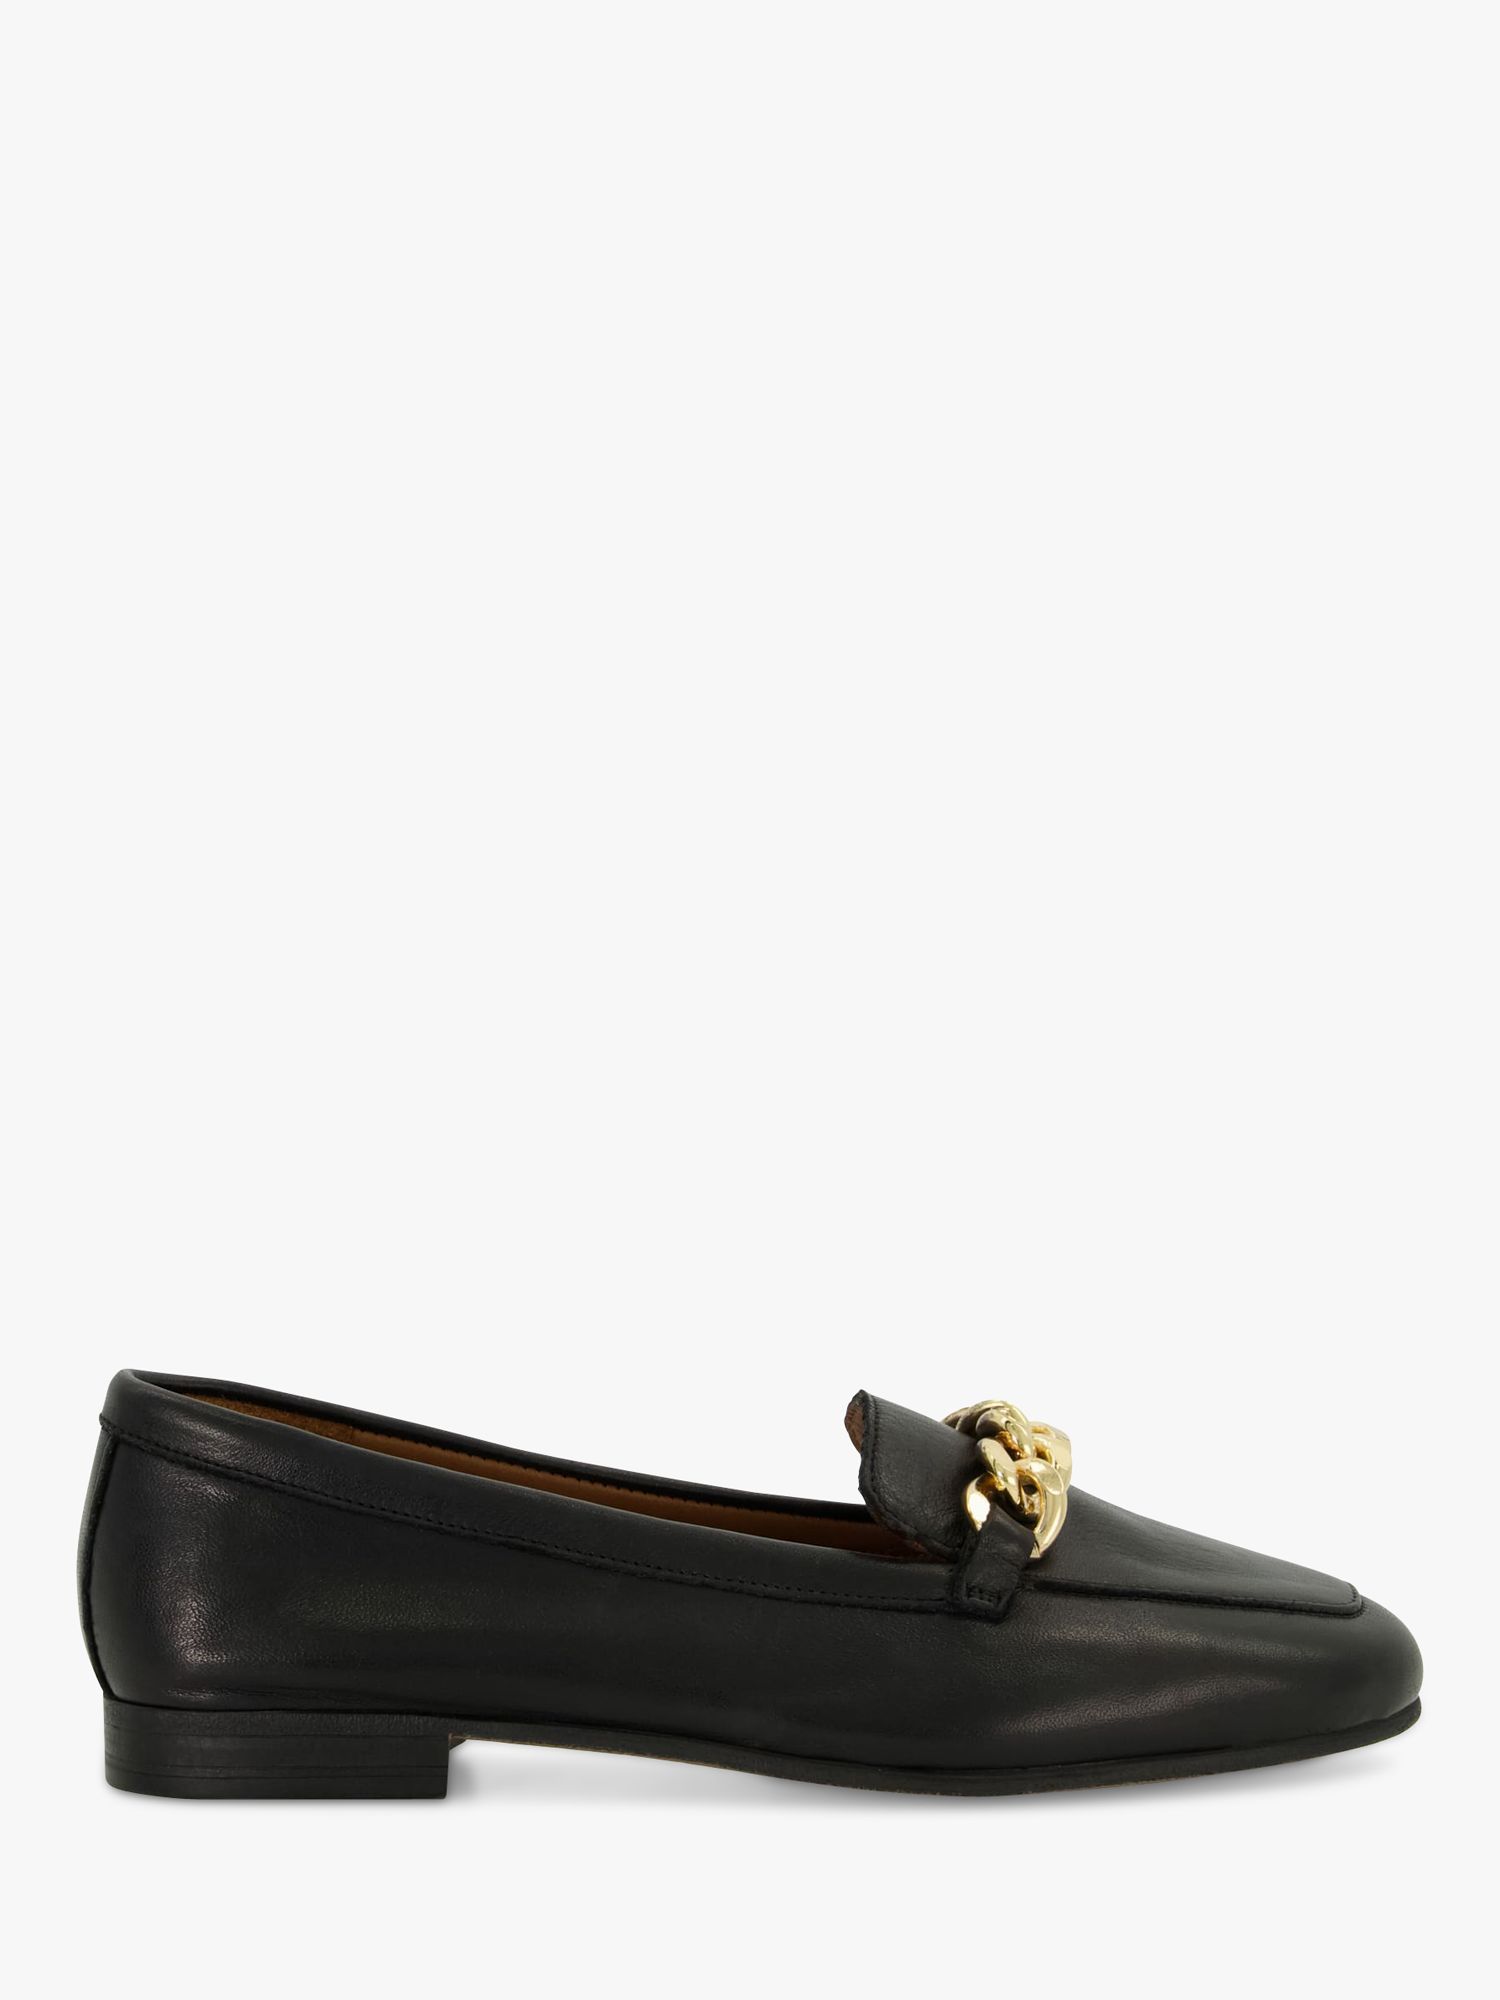 Dune Goldsmith Wide Fit Leather Chain Detail Loafers, Black, 3